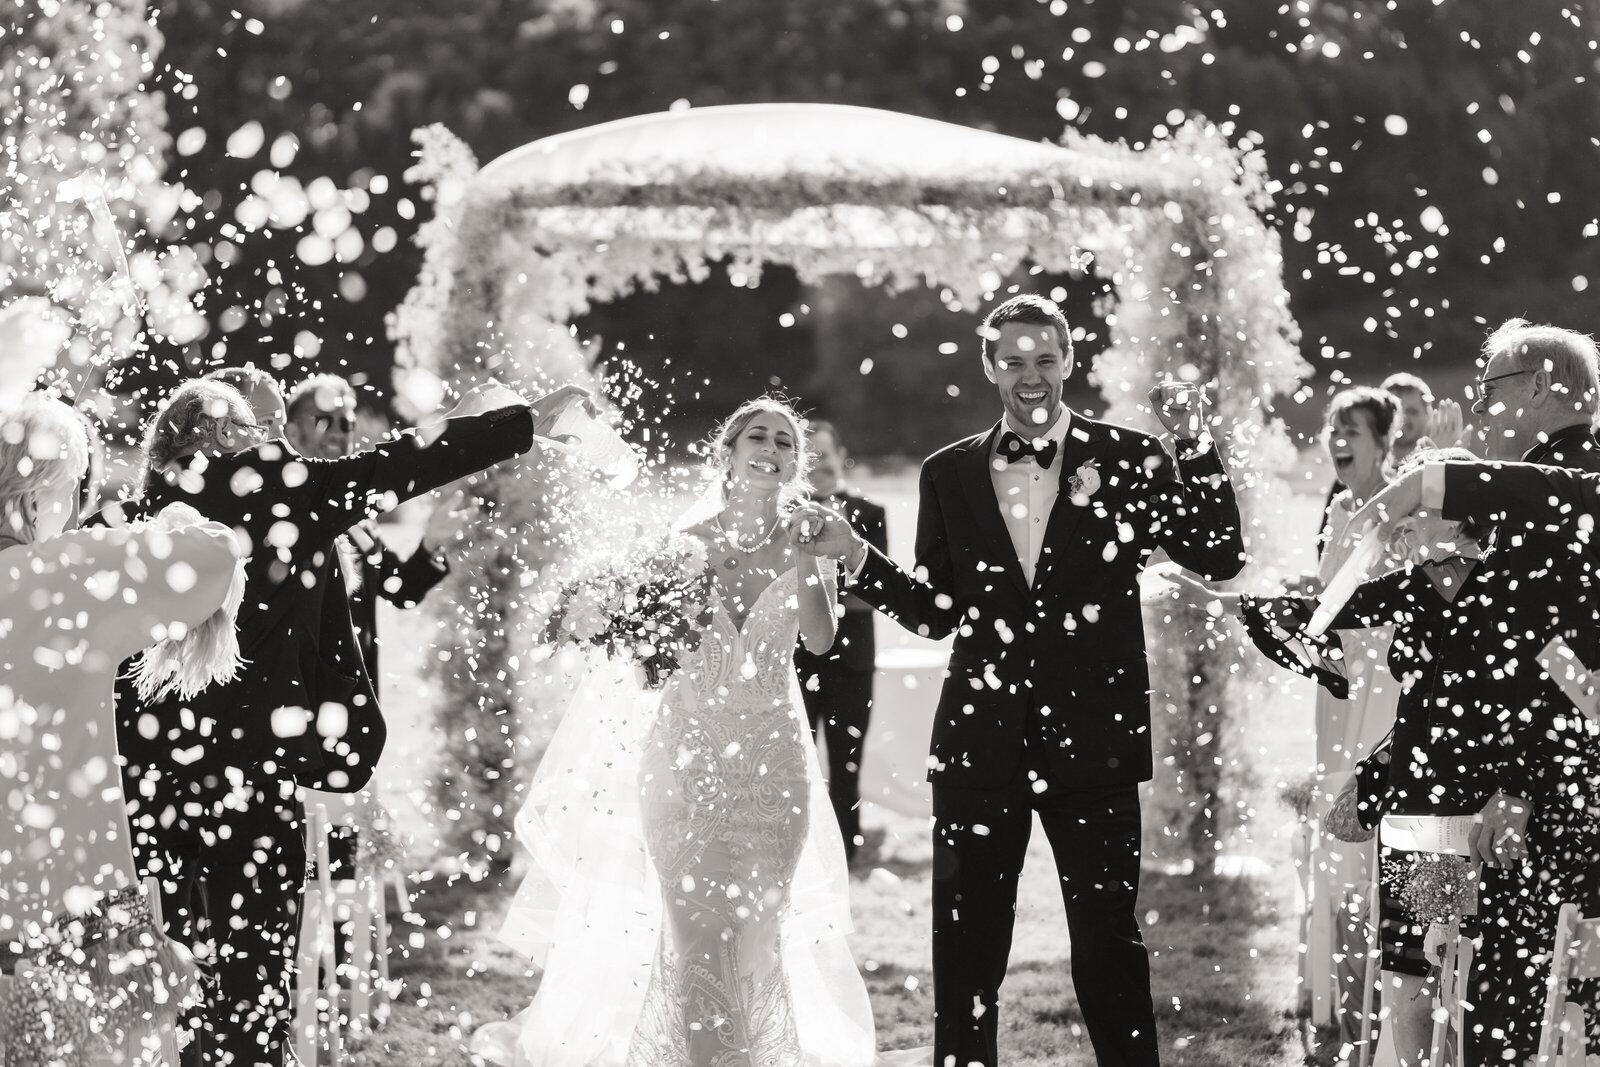 A bride and groom celebrate as they walk down the aisle and their guests throw rose petals into the air